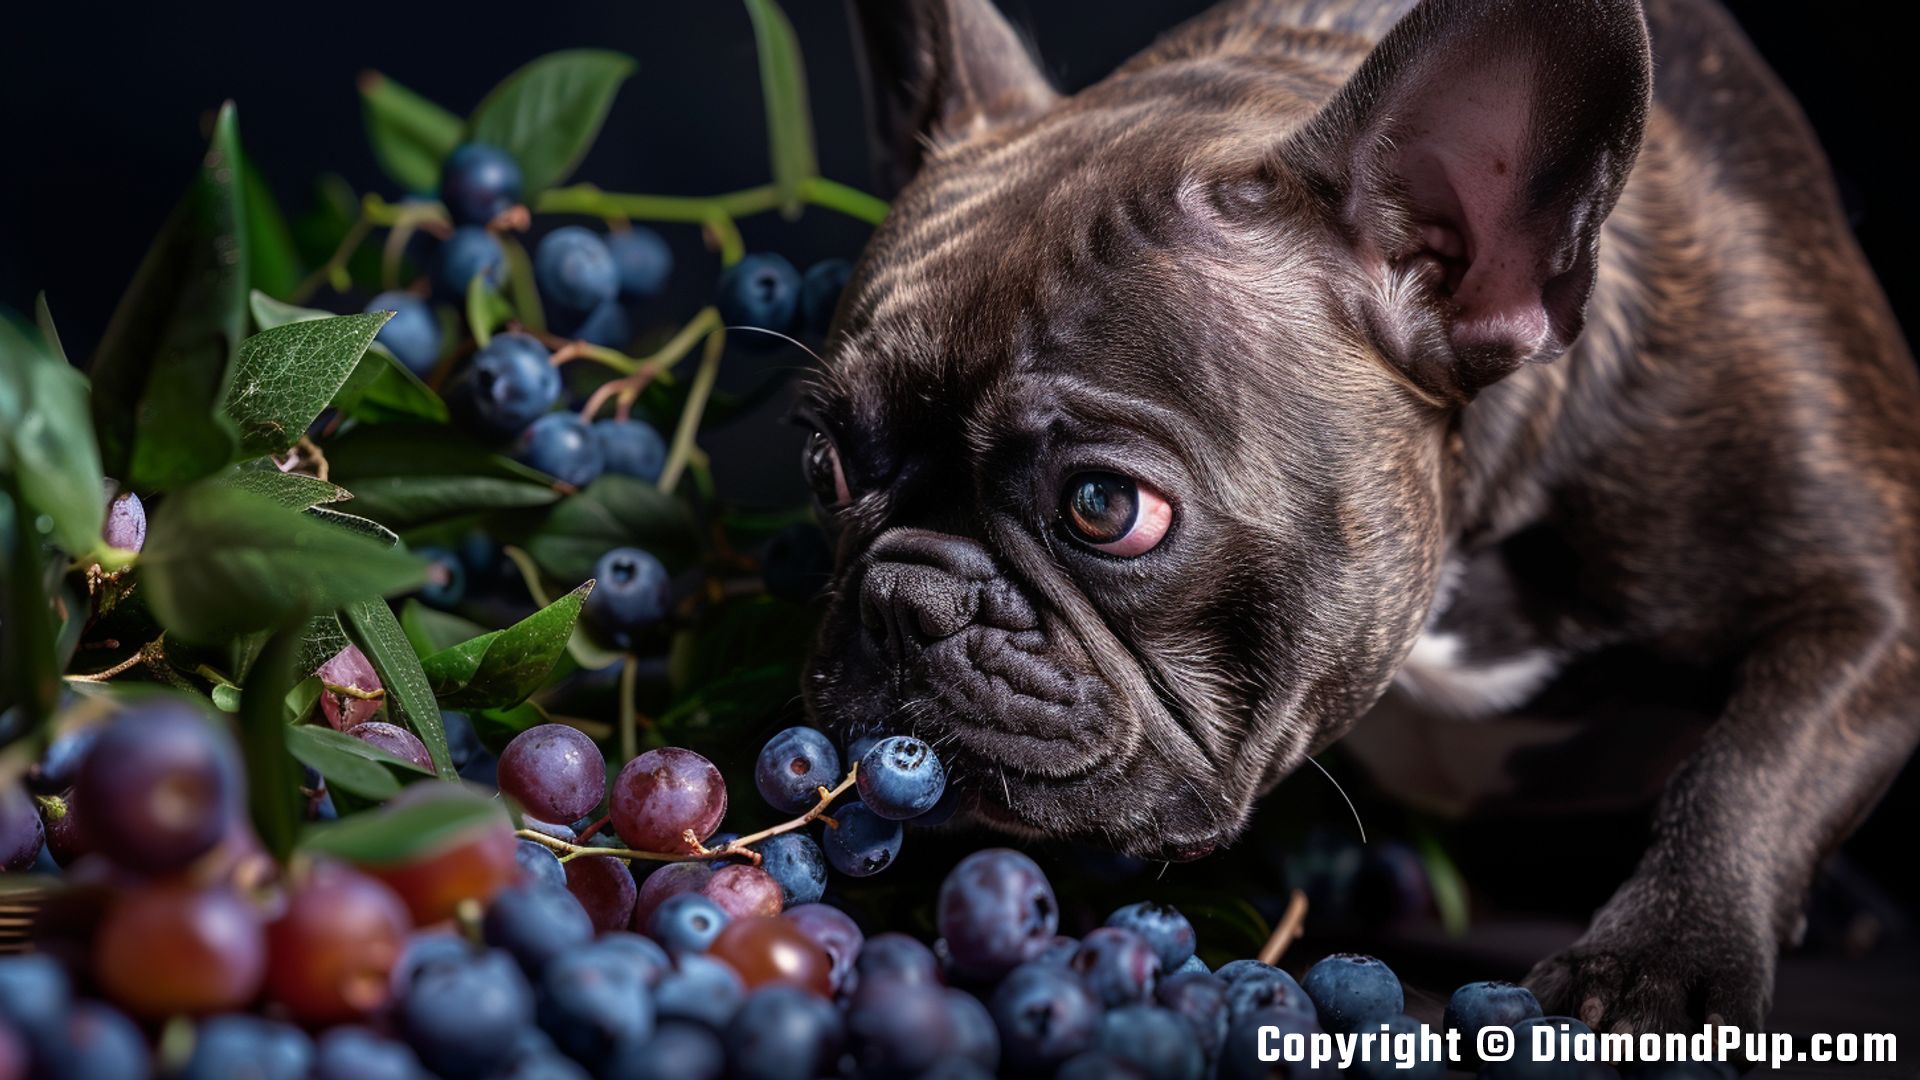 Image of a Playful French Bulldog Eating Blueberries